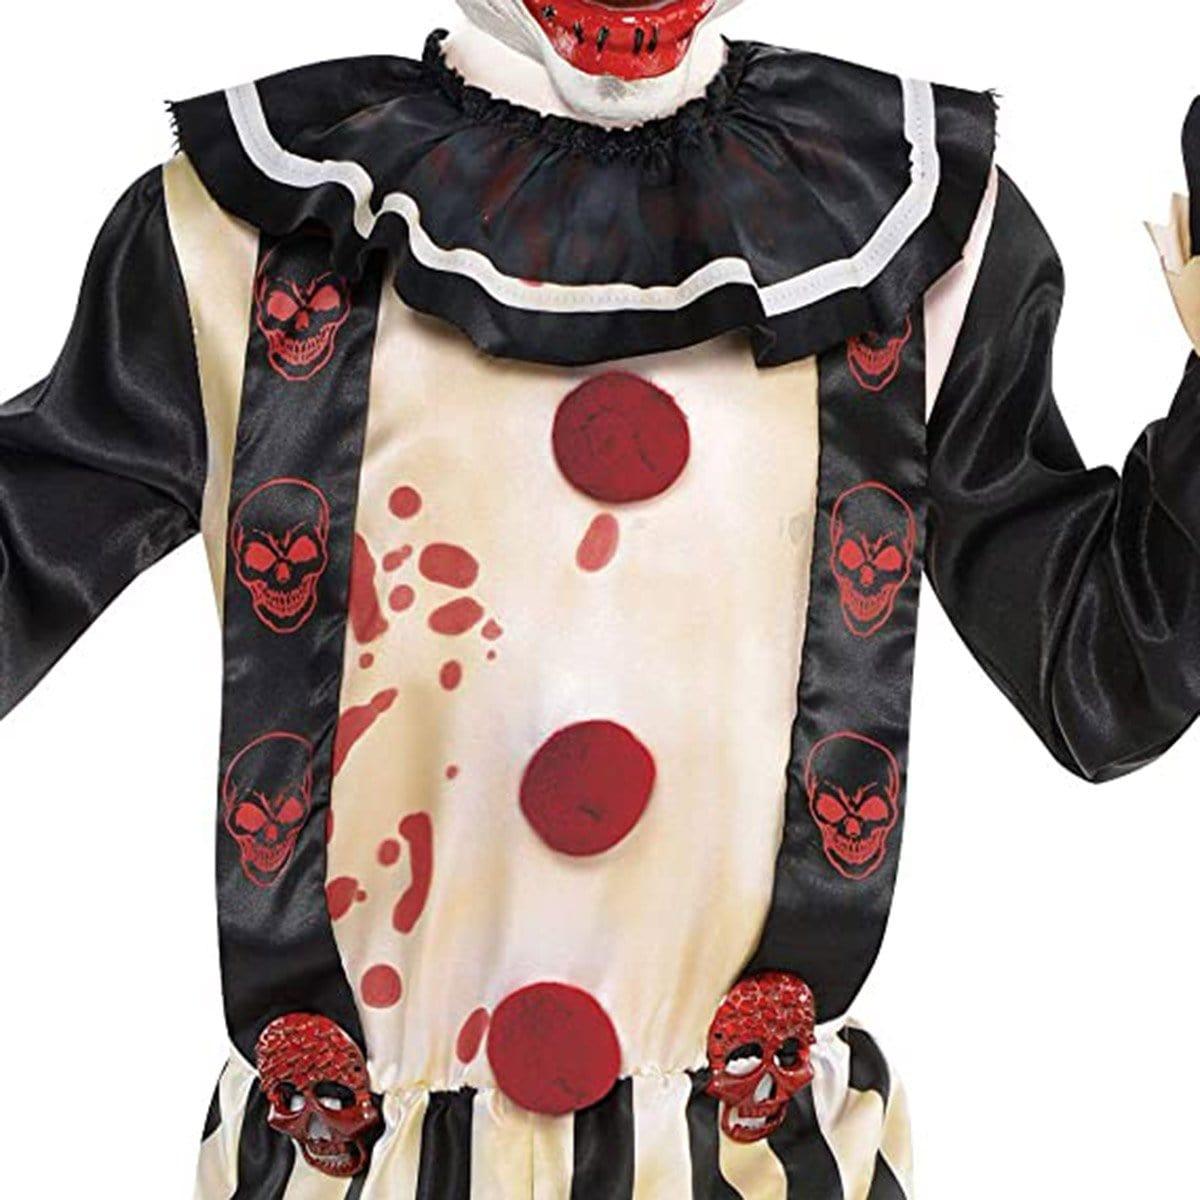 Buy Costumes Slasher Clown Costume for Kids sold at Party Expert